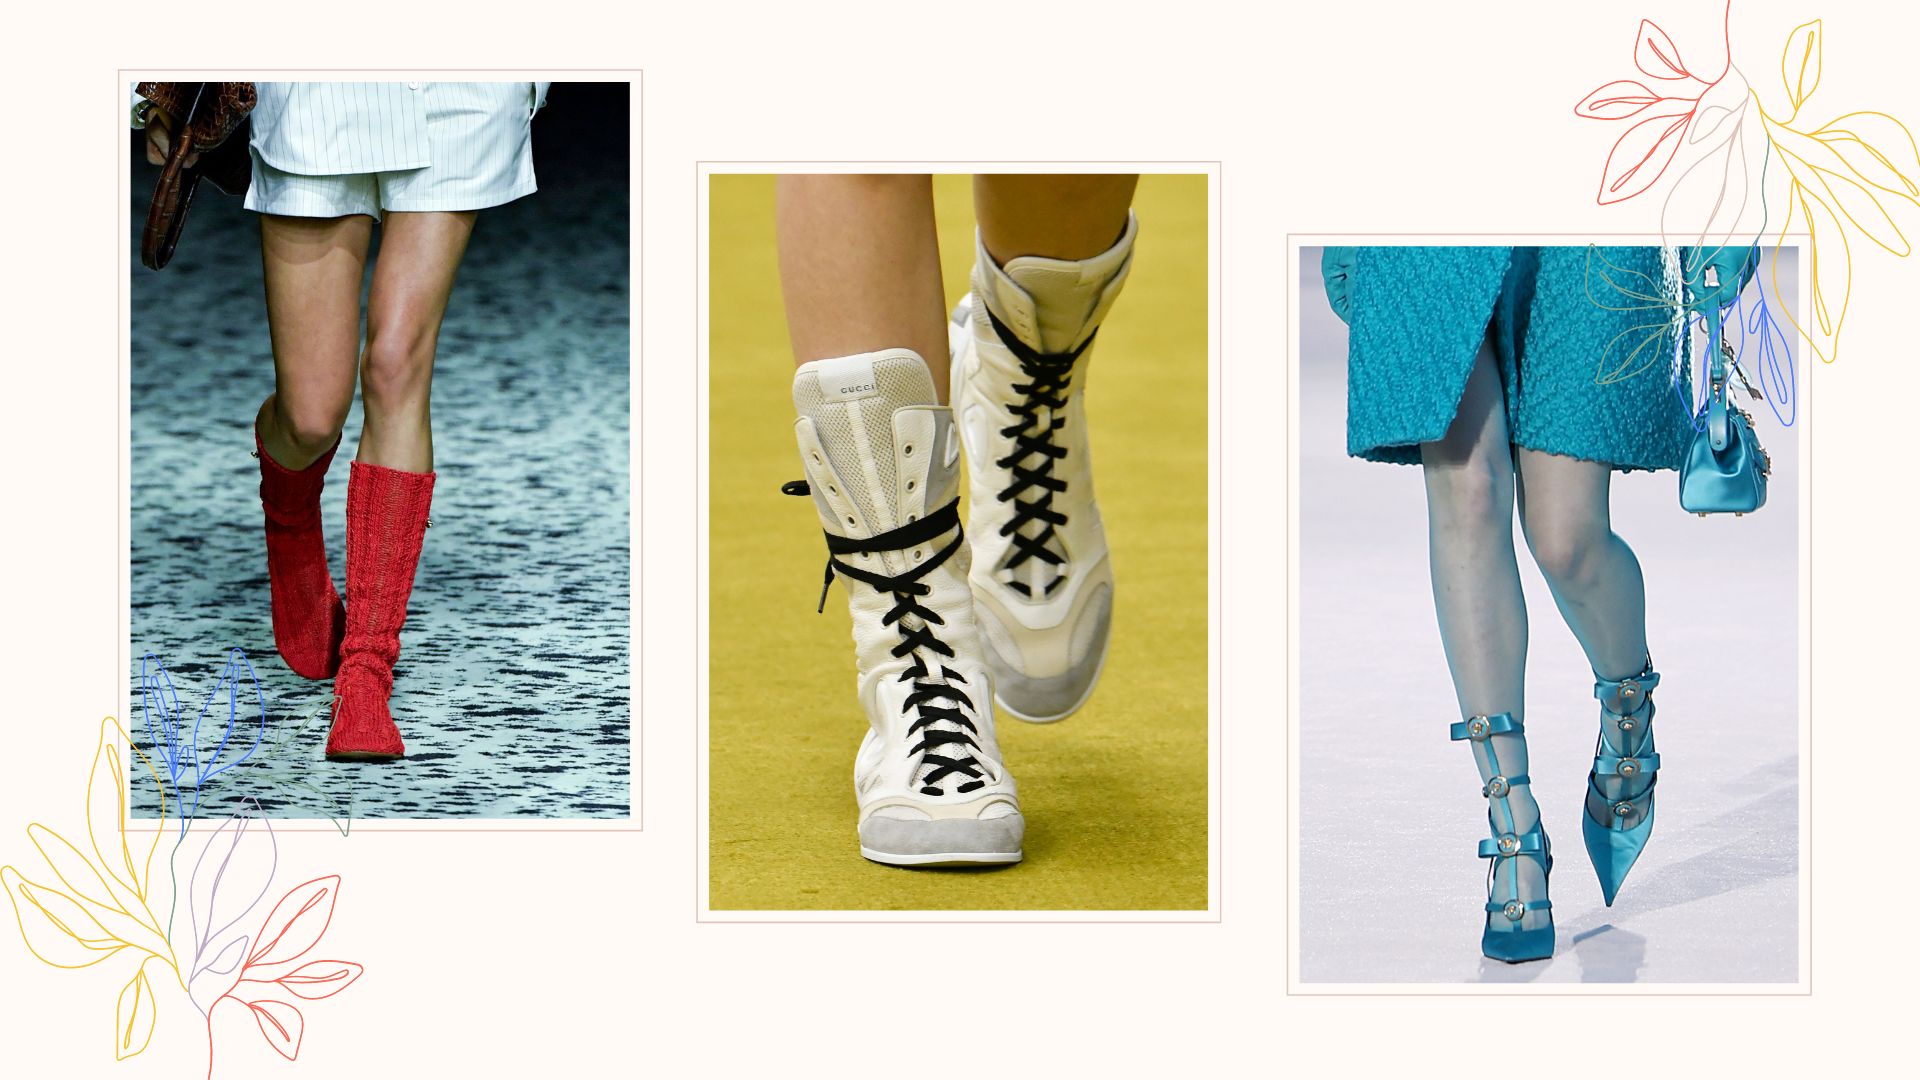 WHAT ARE SOME OF THE MUST HAVE SHOE TRENDS THIS SEASON?” — STYLED